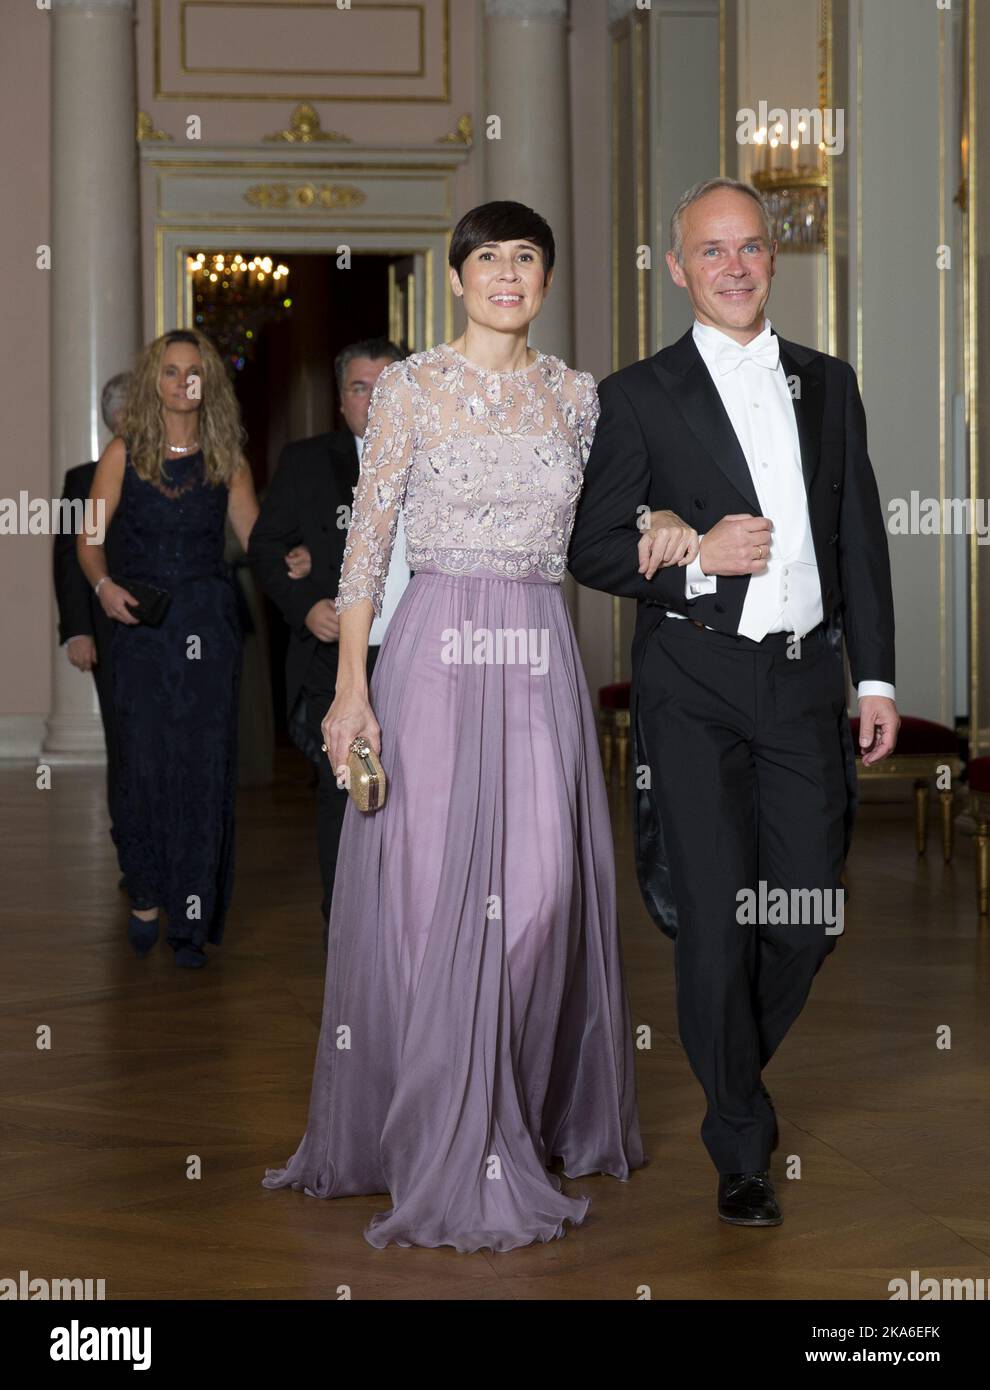 OSLO 20151022. Parliamentary Dinner. Minister of Local Government and Modernisation Jan Tore Sanner (H) and Minister of Defence Ine Eriksen SÃ¸reide (H), heading into the parliamentary dinner at the Royal Palace. POOL Photo: Berit Roald / NTB scanpix OSLO 20151022. Stortingsmiddag. Kommunal- og moderniseringsminister Jan Tore Sanner (H) og forsvarsminister Ine Eriksen SÃ¸reide (H), pa vei inn til stortingsmiddagen pa Slottet. POOL Foto: Berit Roald / NTB scanpix  Stock Photo